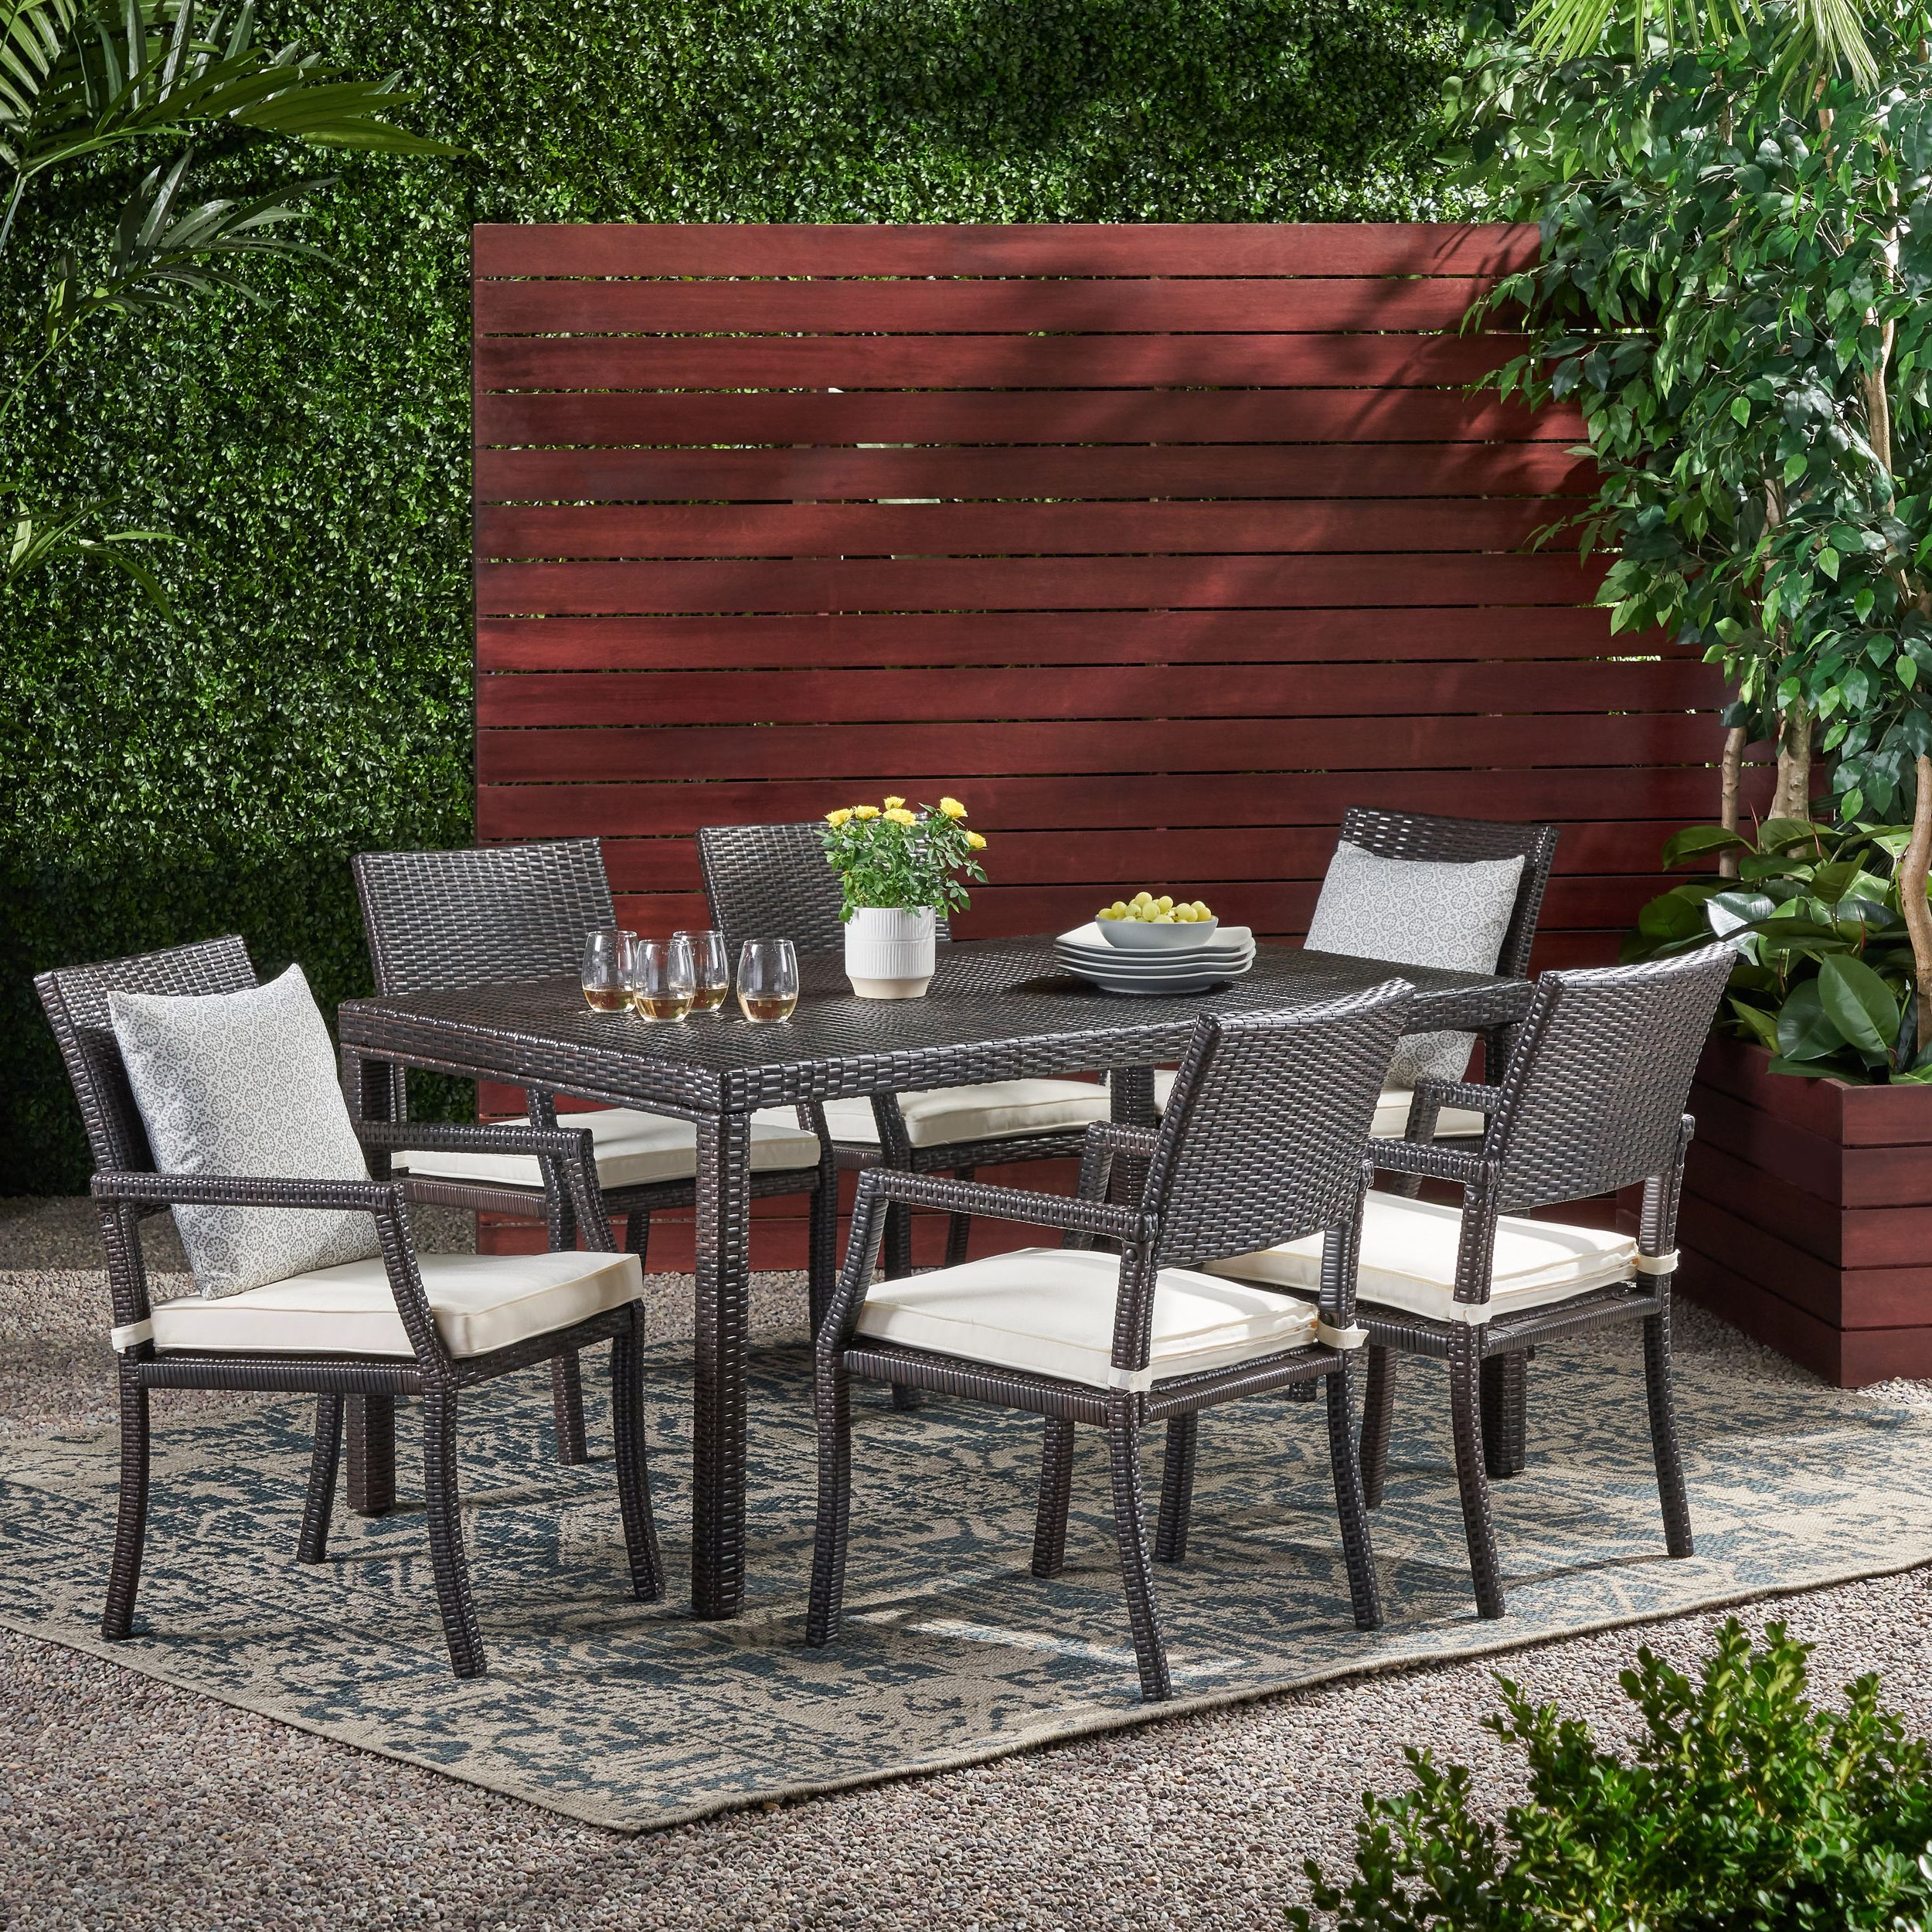 Most Recently Released Outdoor 7 Piece Wicker Rectangular Dining Set,multibrown,white With Regard To Rectangular Patio Dining Sets (View 1 of 15)